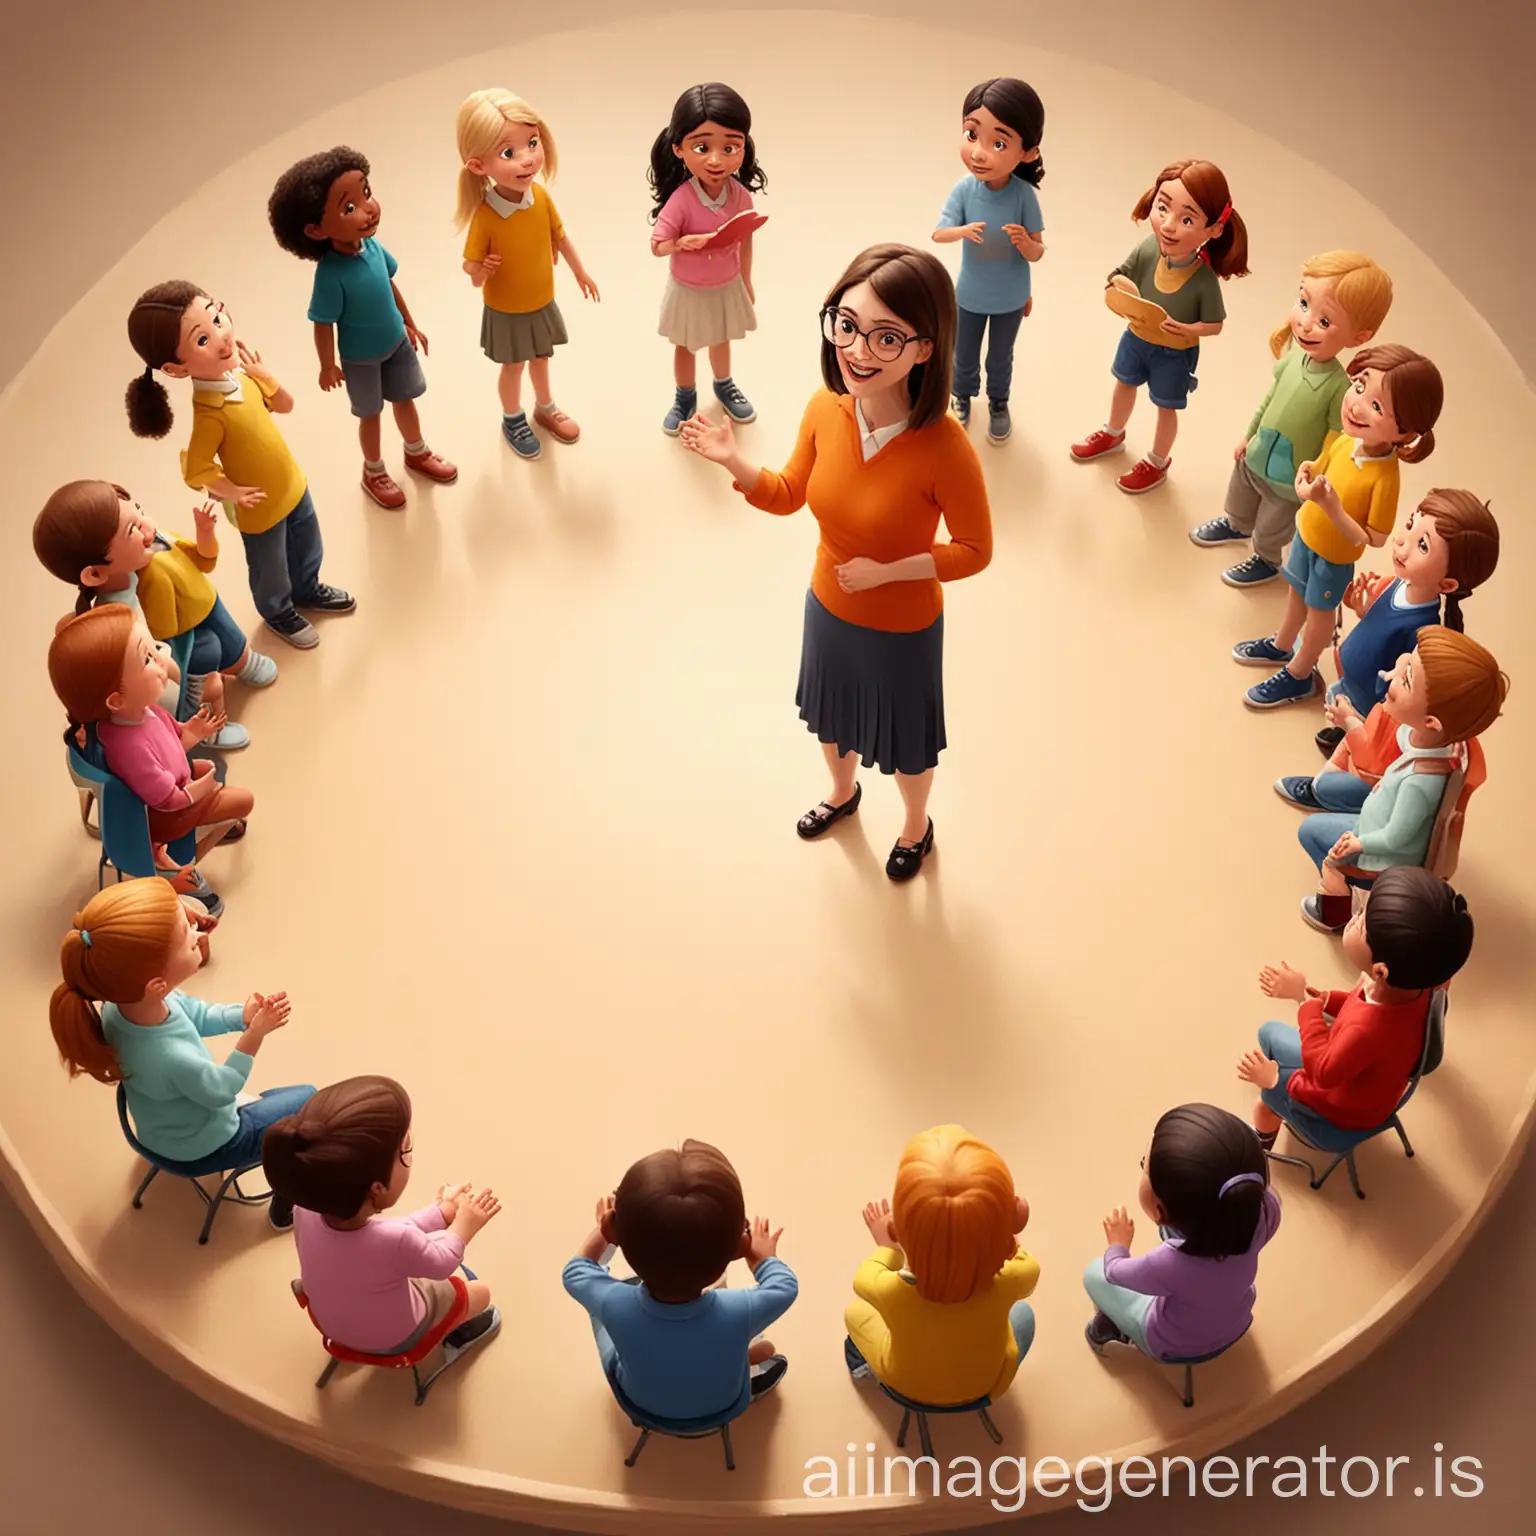 Teacher-Narrating-Story-to-Kids-in-Classroom-Circle